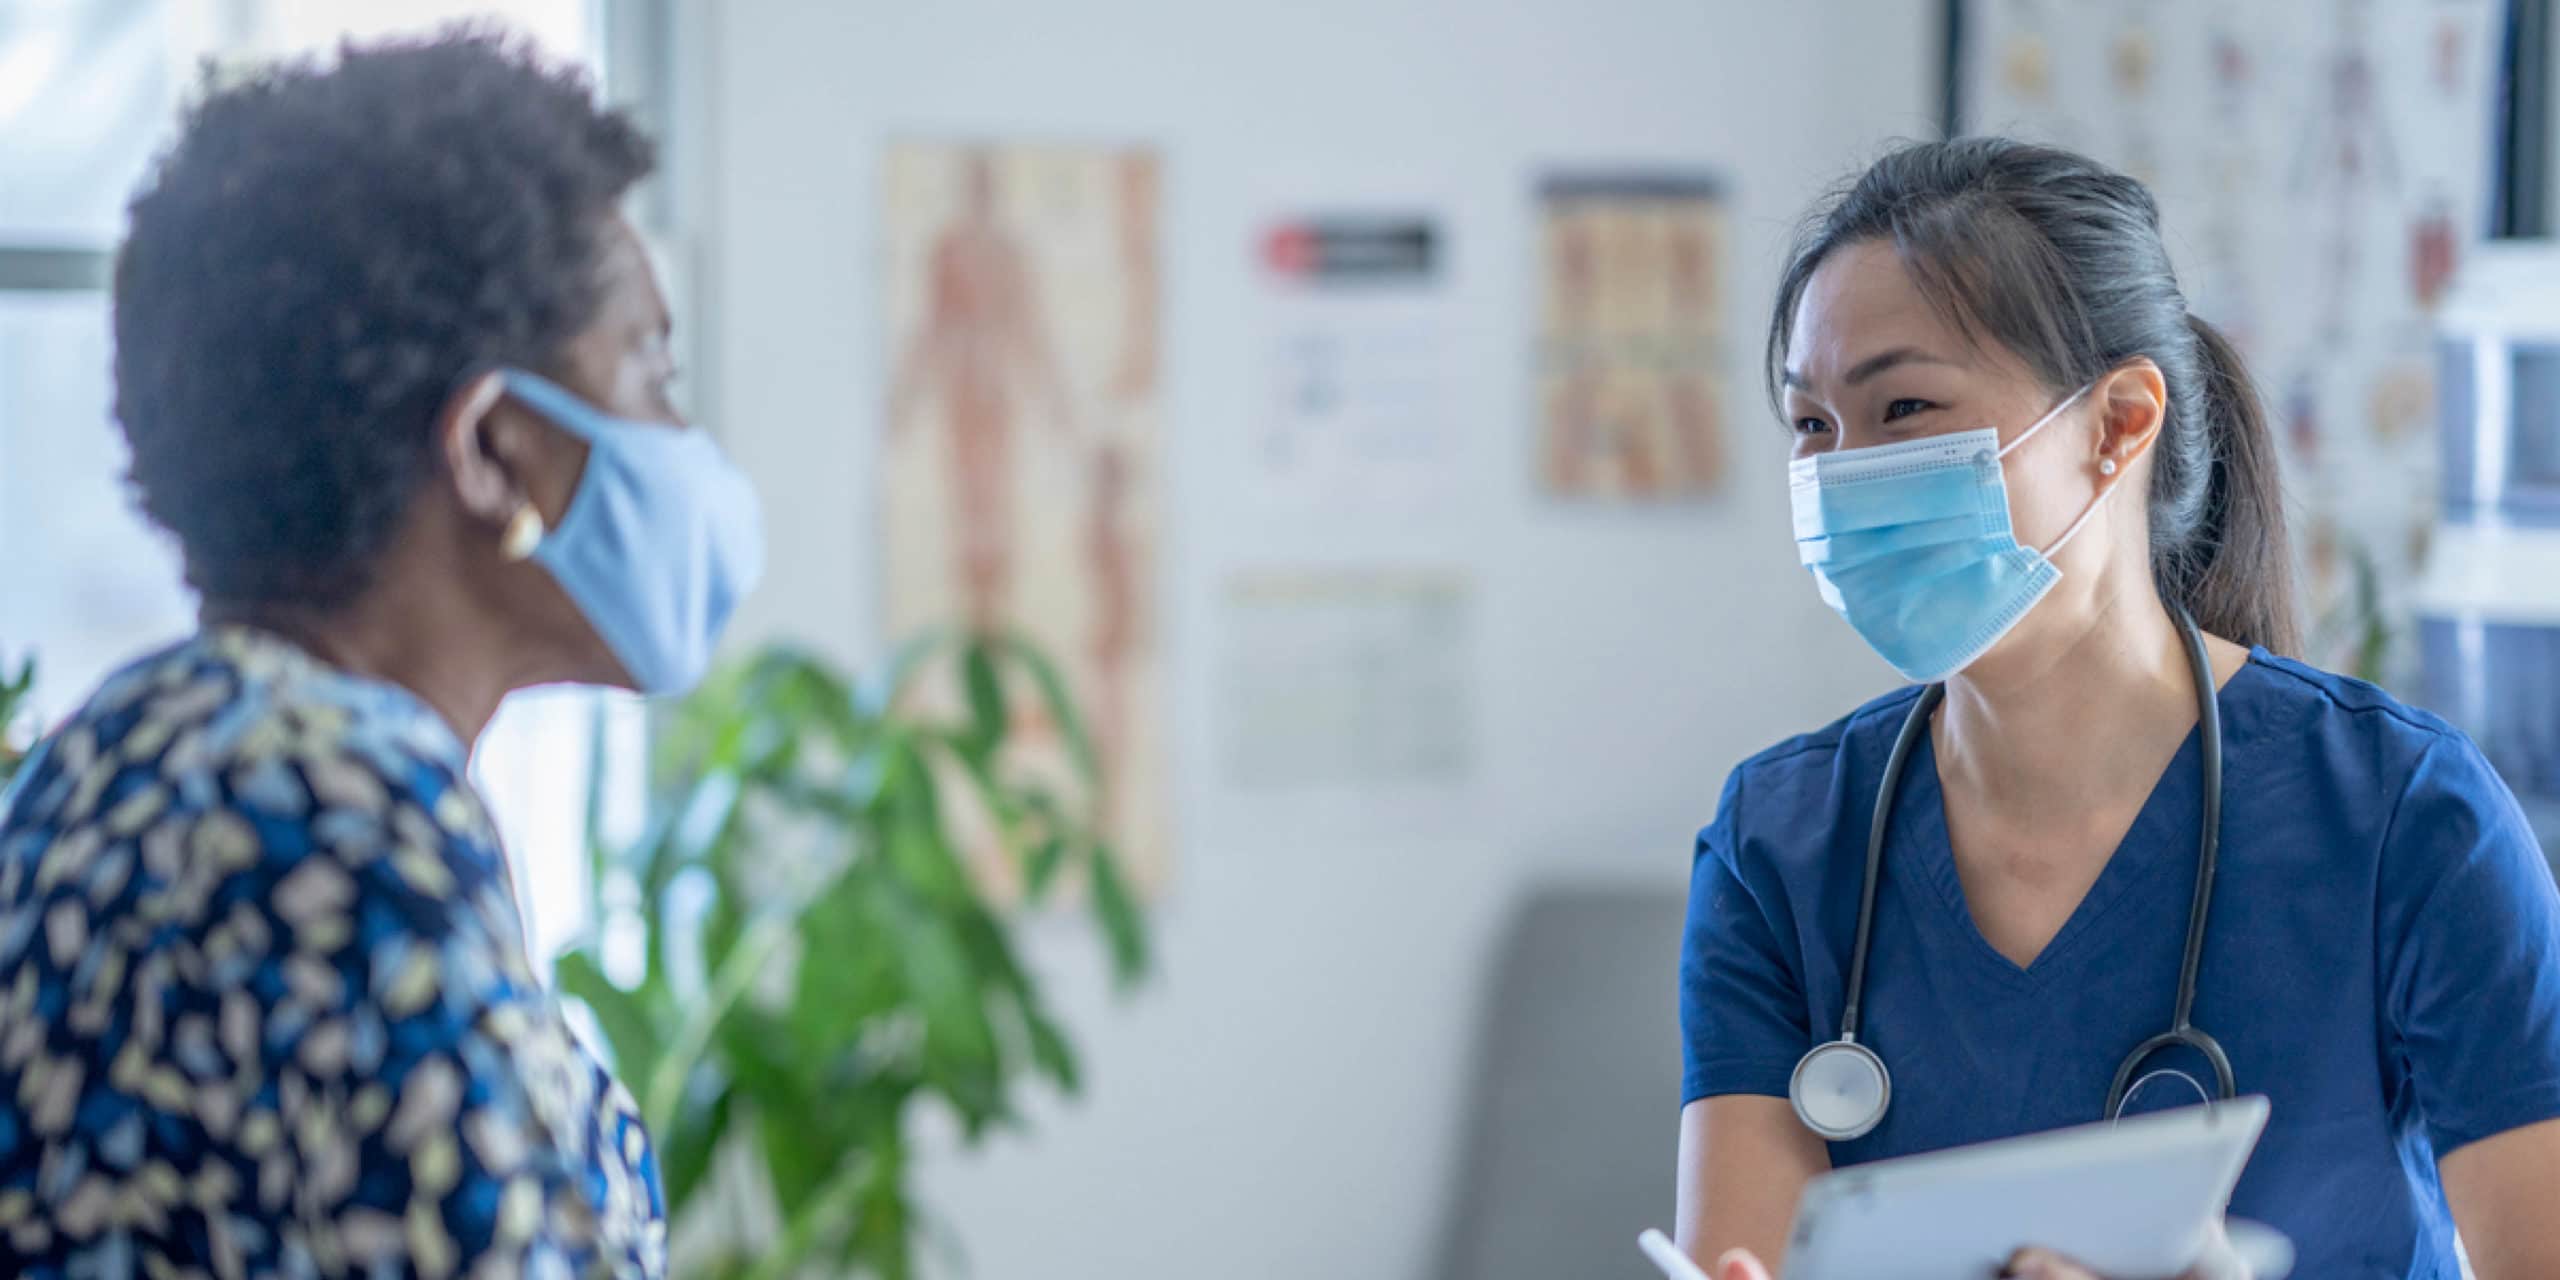 Doctor and patient in consult room in conversation with surgical masks on